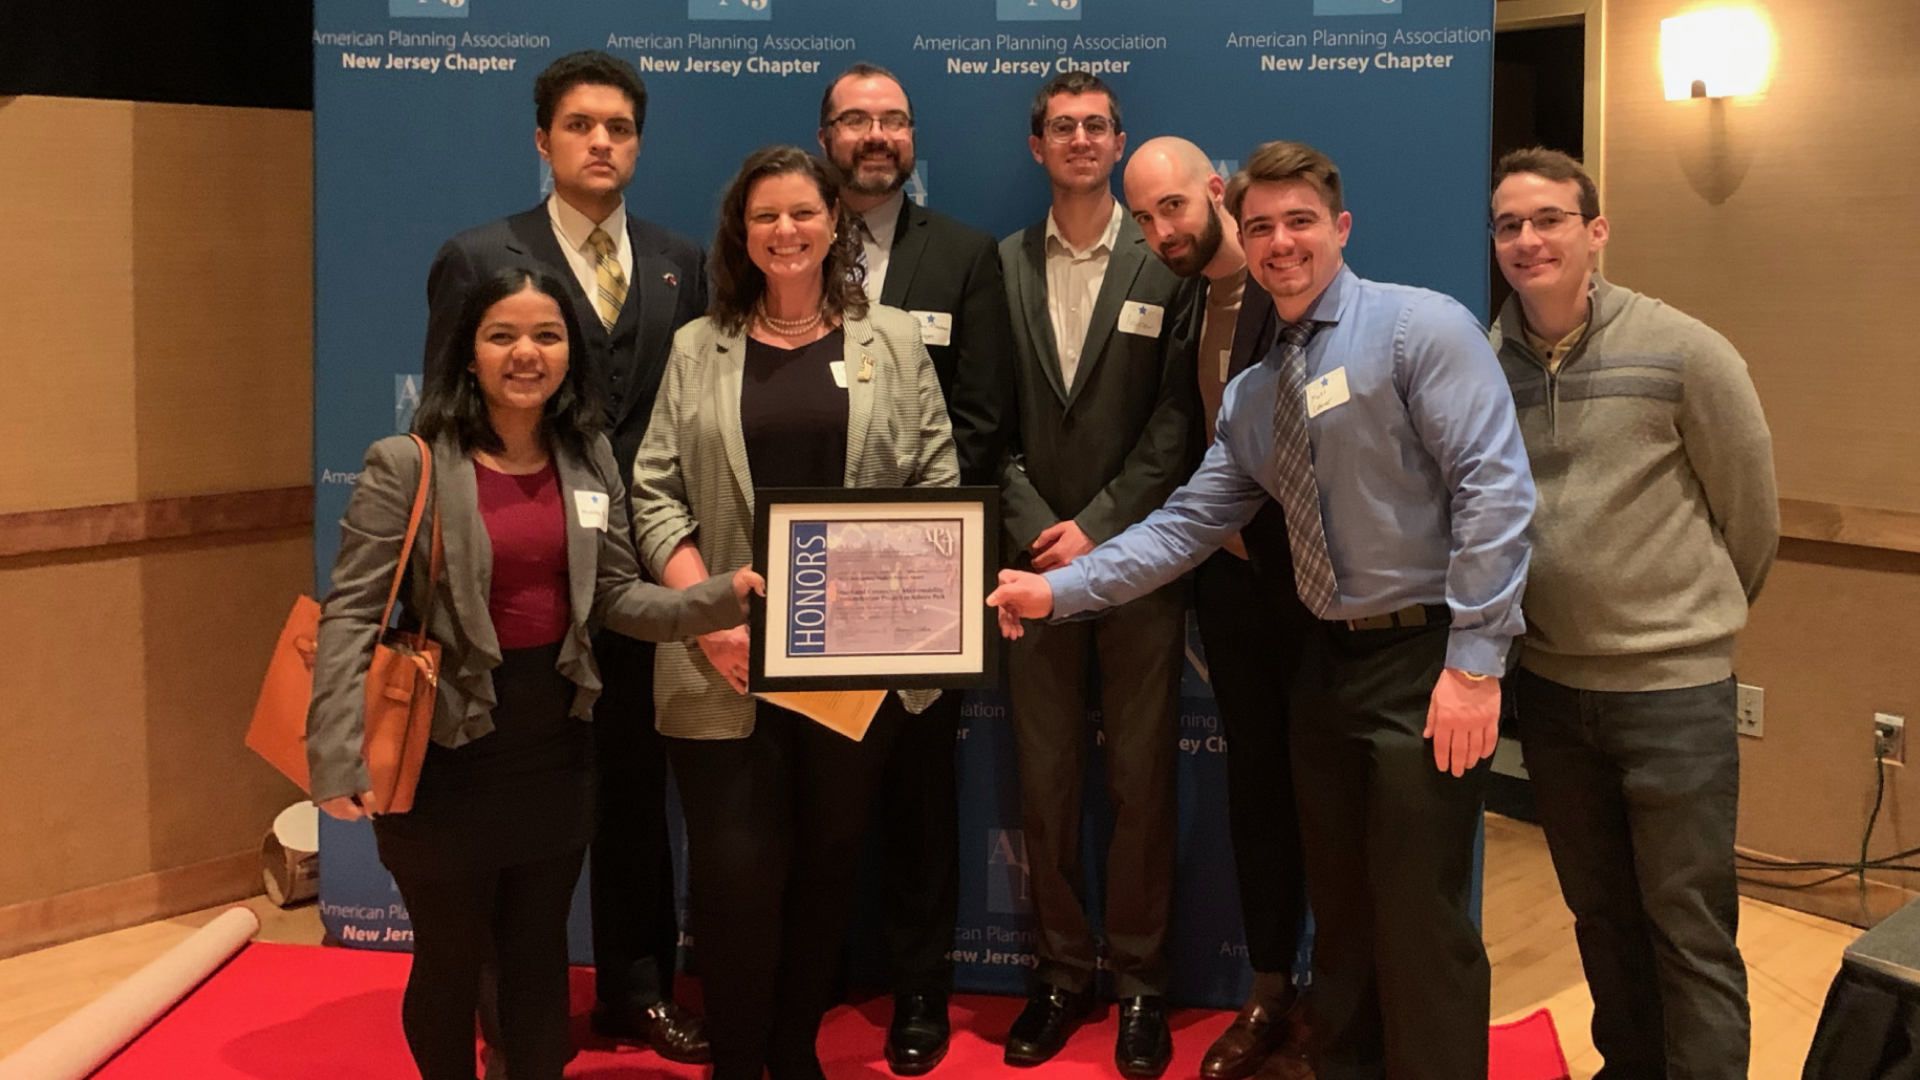 Spring 2022 Micromobility Graduate Studio is Recipient of APA-NJ Outstanding Student Project Award